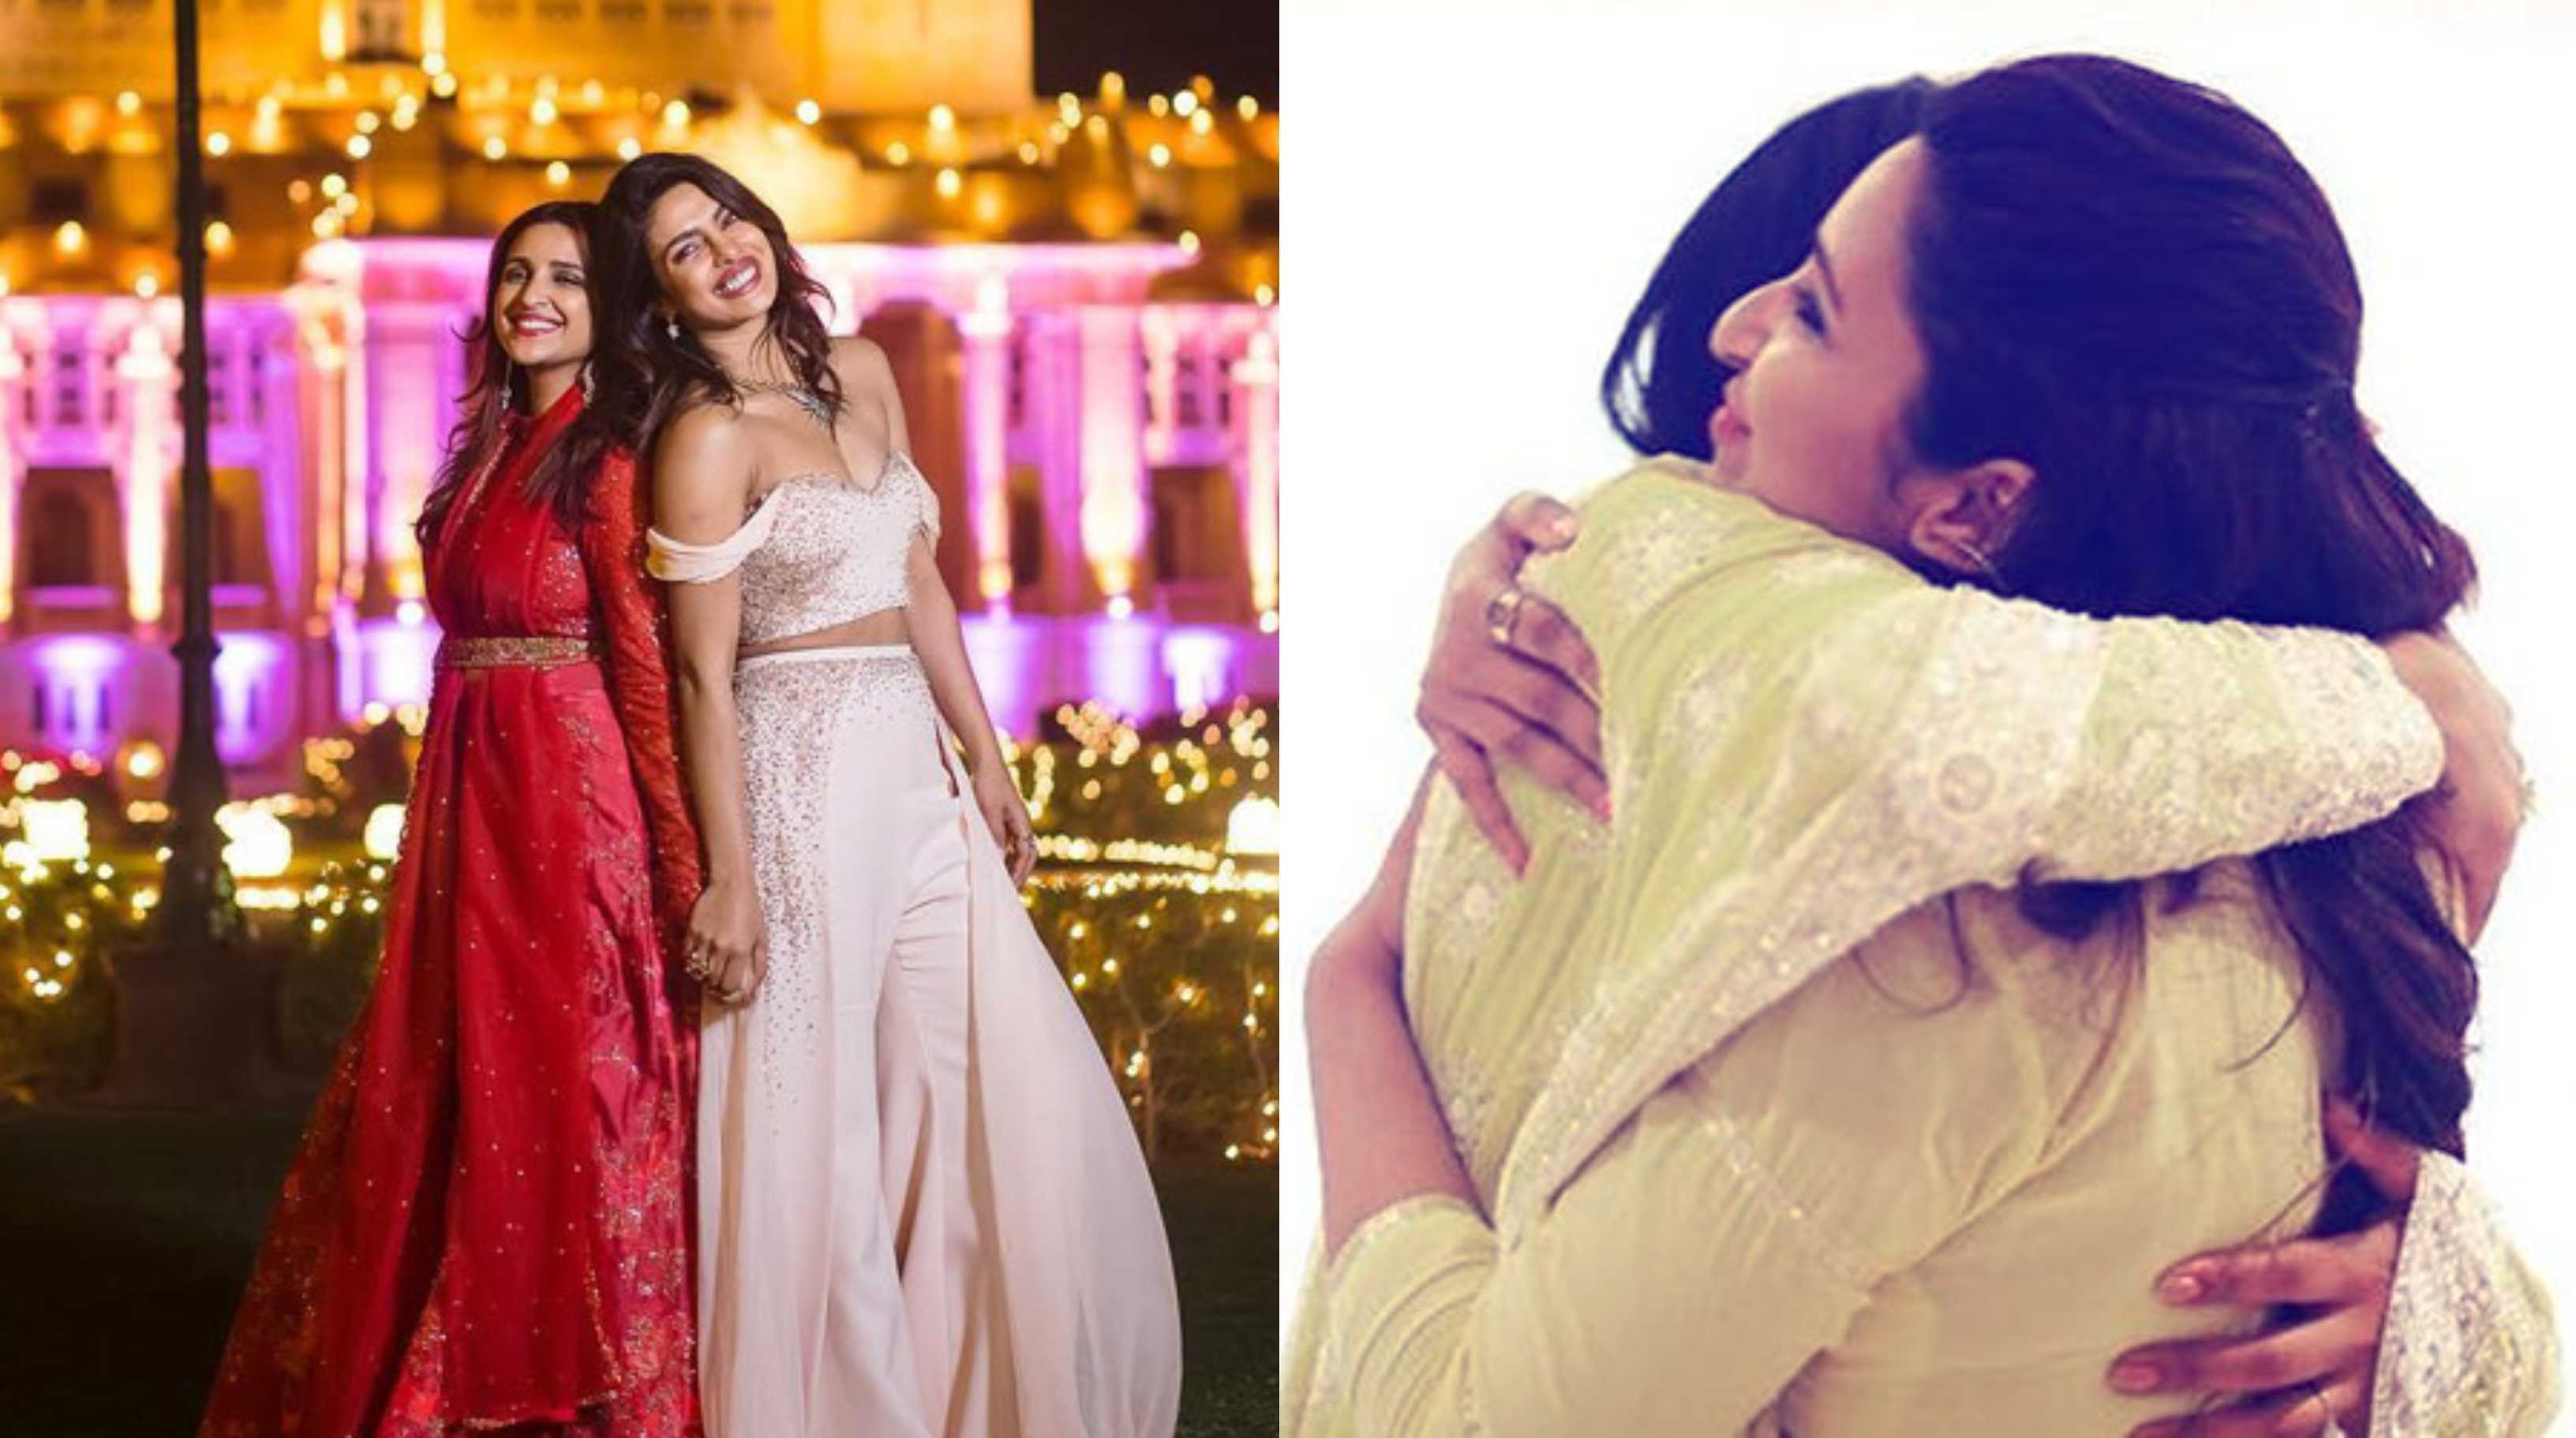 Priyanka Chopra Jonas shares a glimpse of her designer outfit for Parineeti Chopra’s engagement; check it out